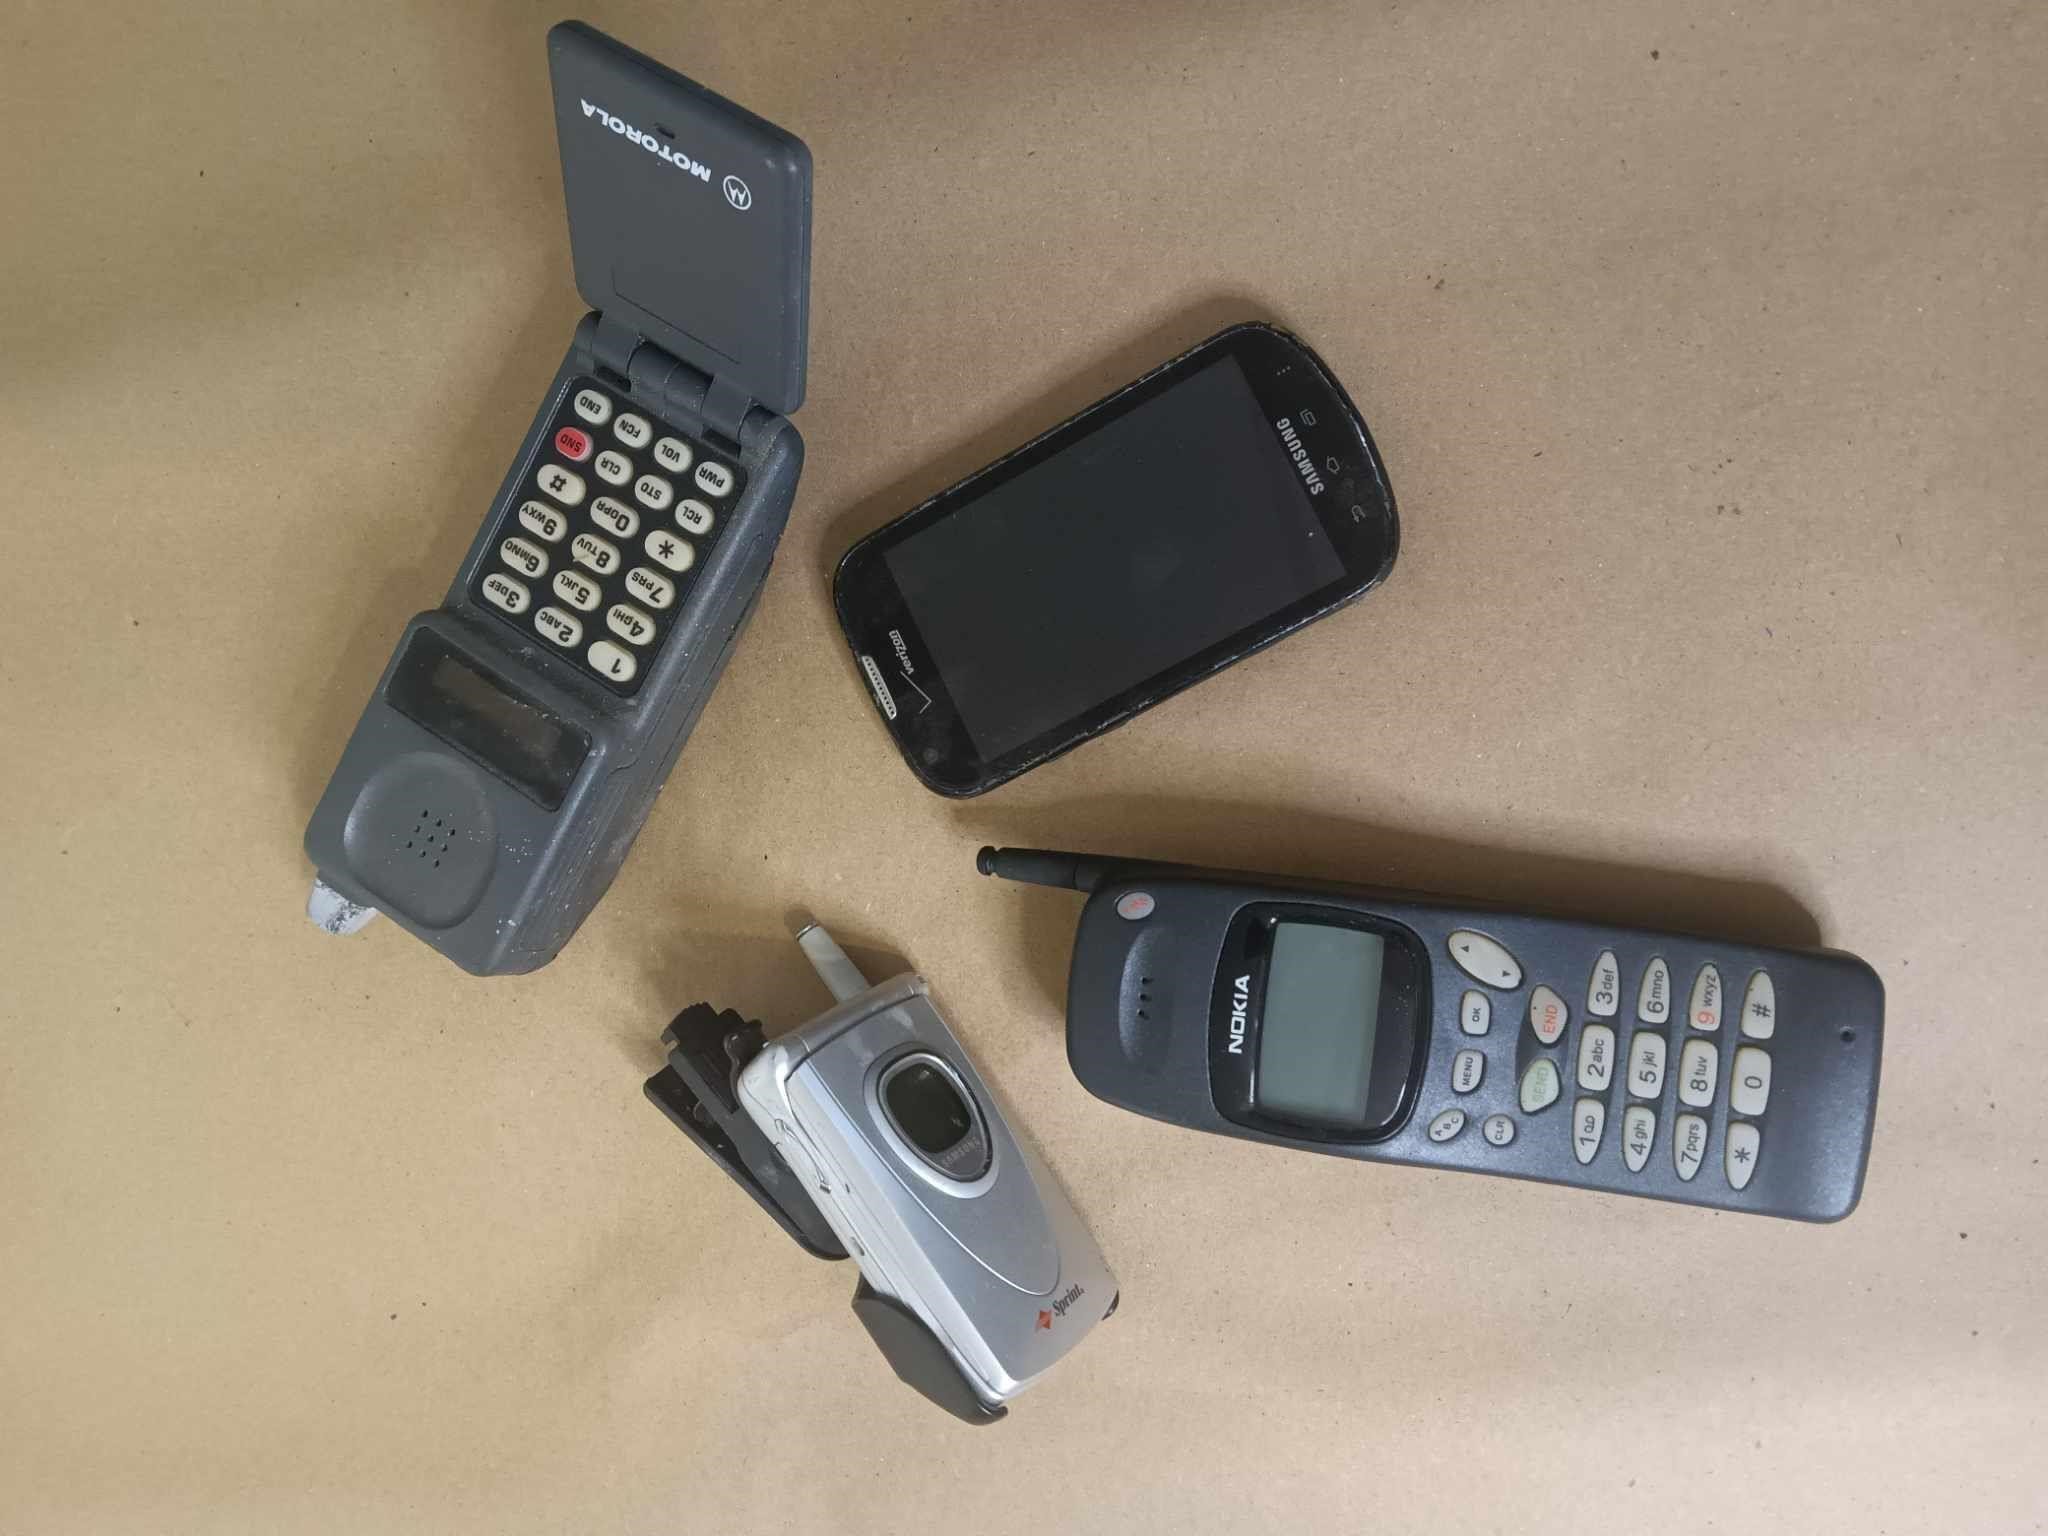 LOT DEAL OF VINTAGE UNTESTED CELL PHONES